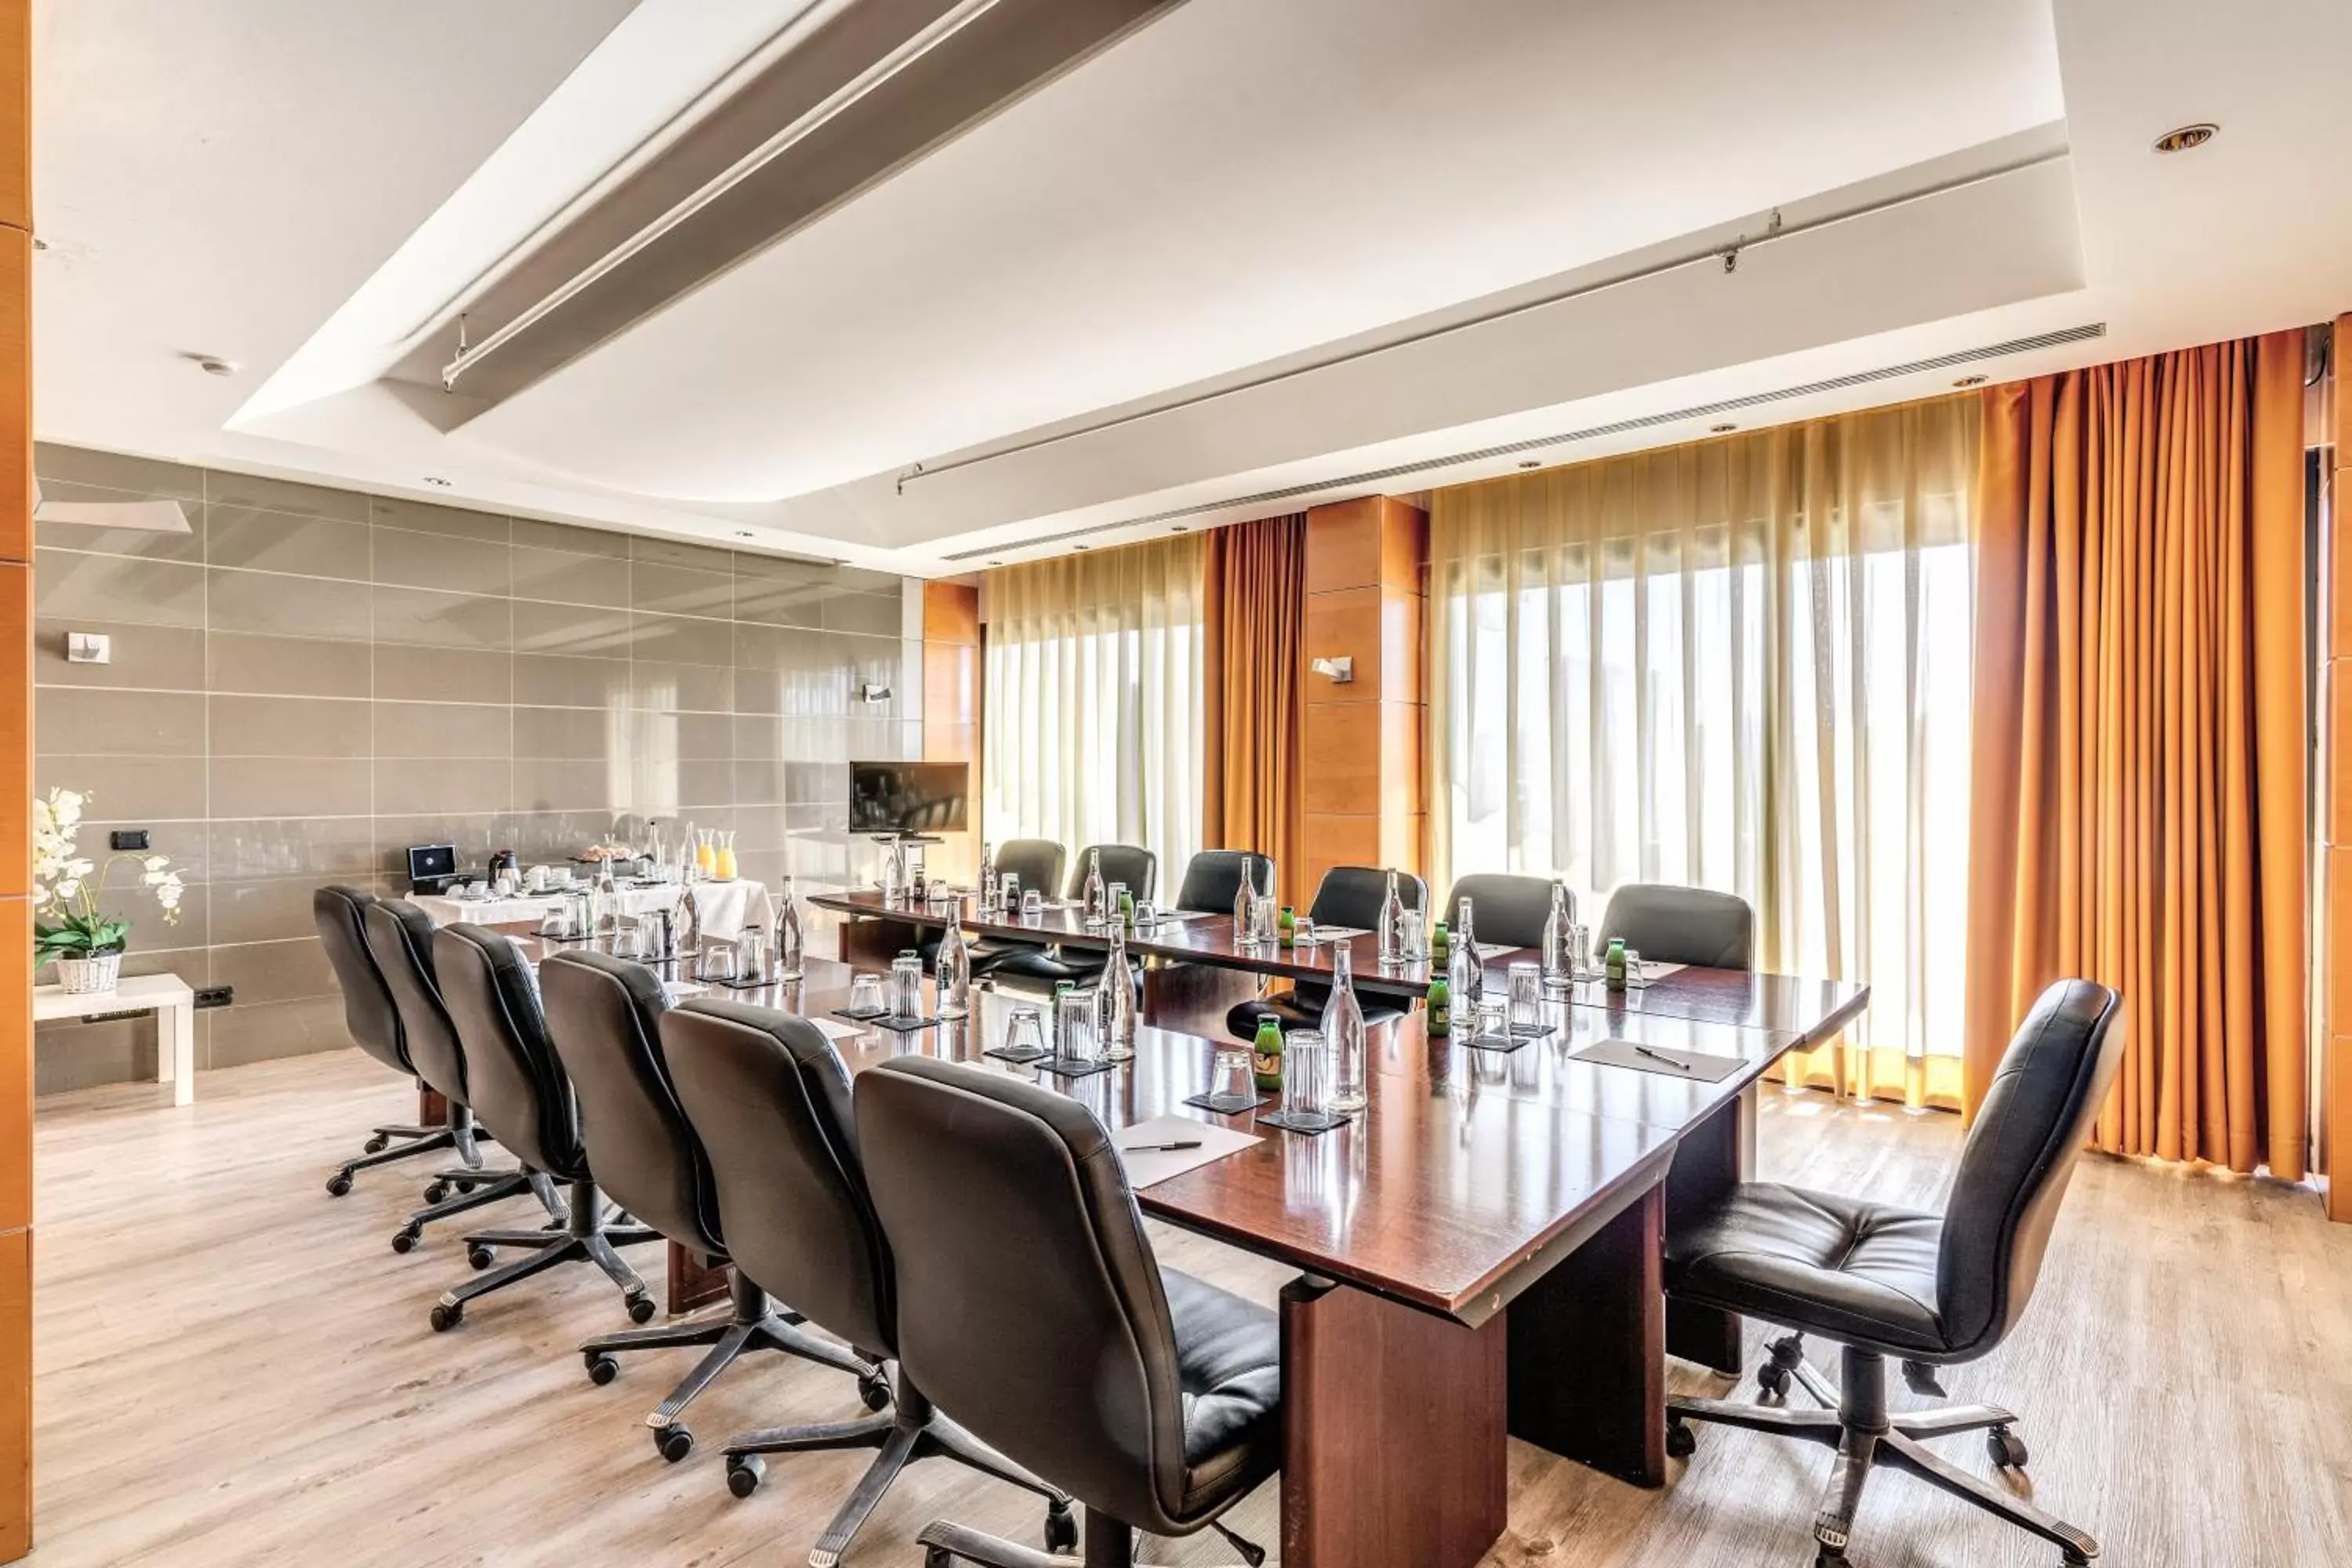 Meeting/conference room in MIDAS Palace Hotel